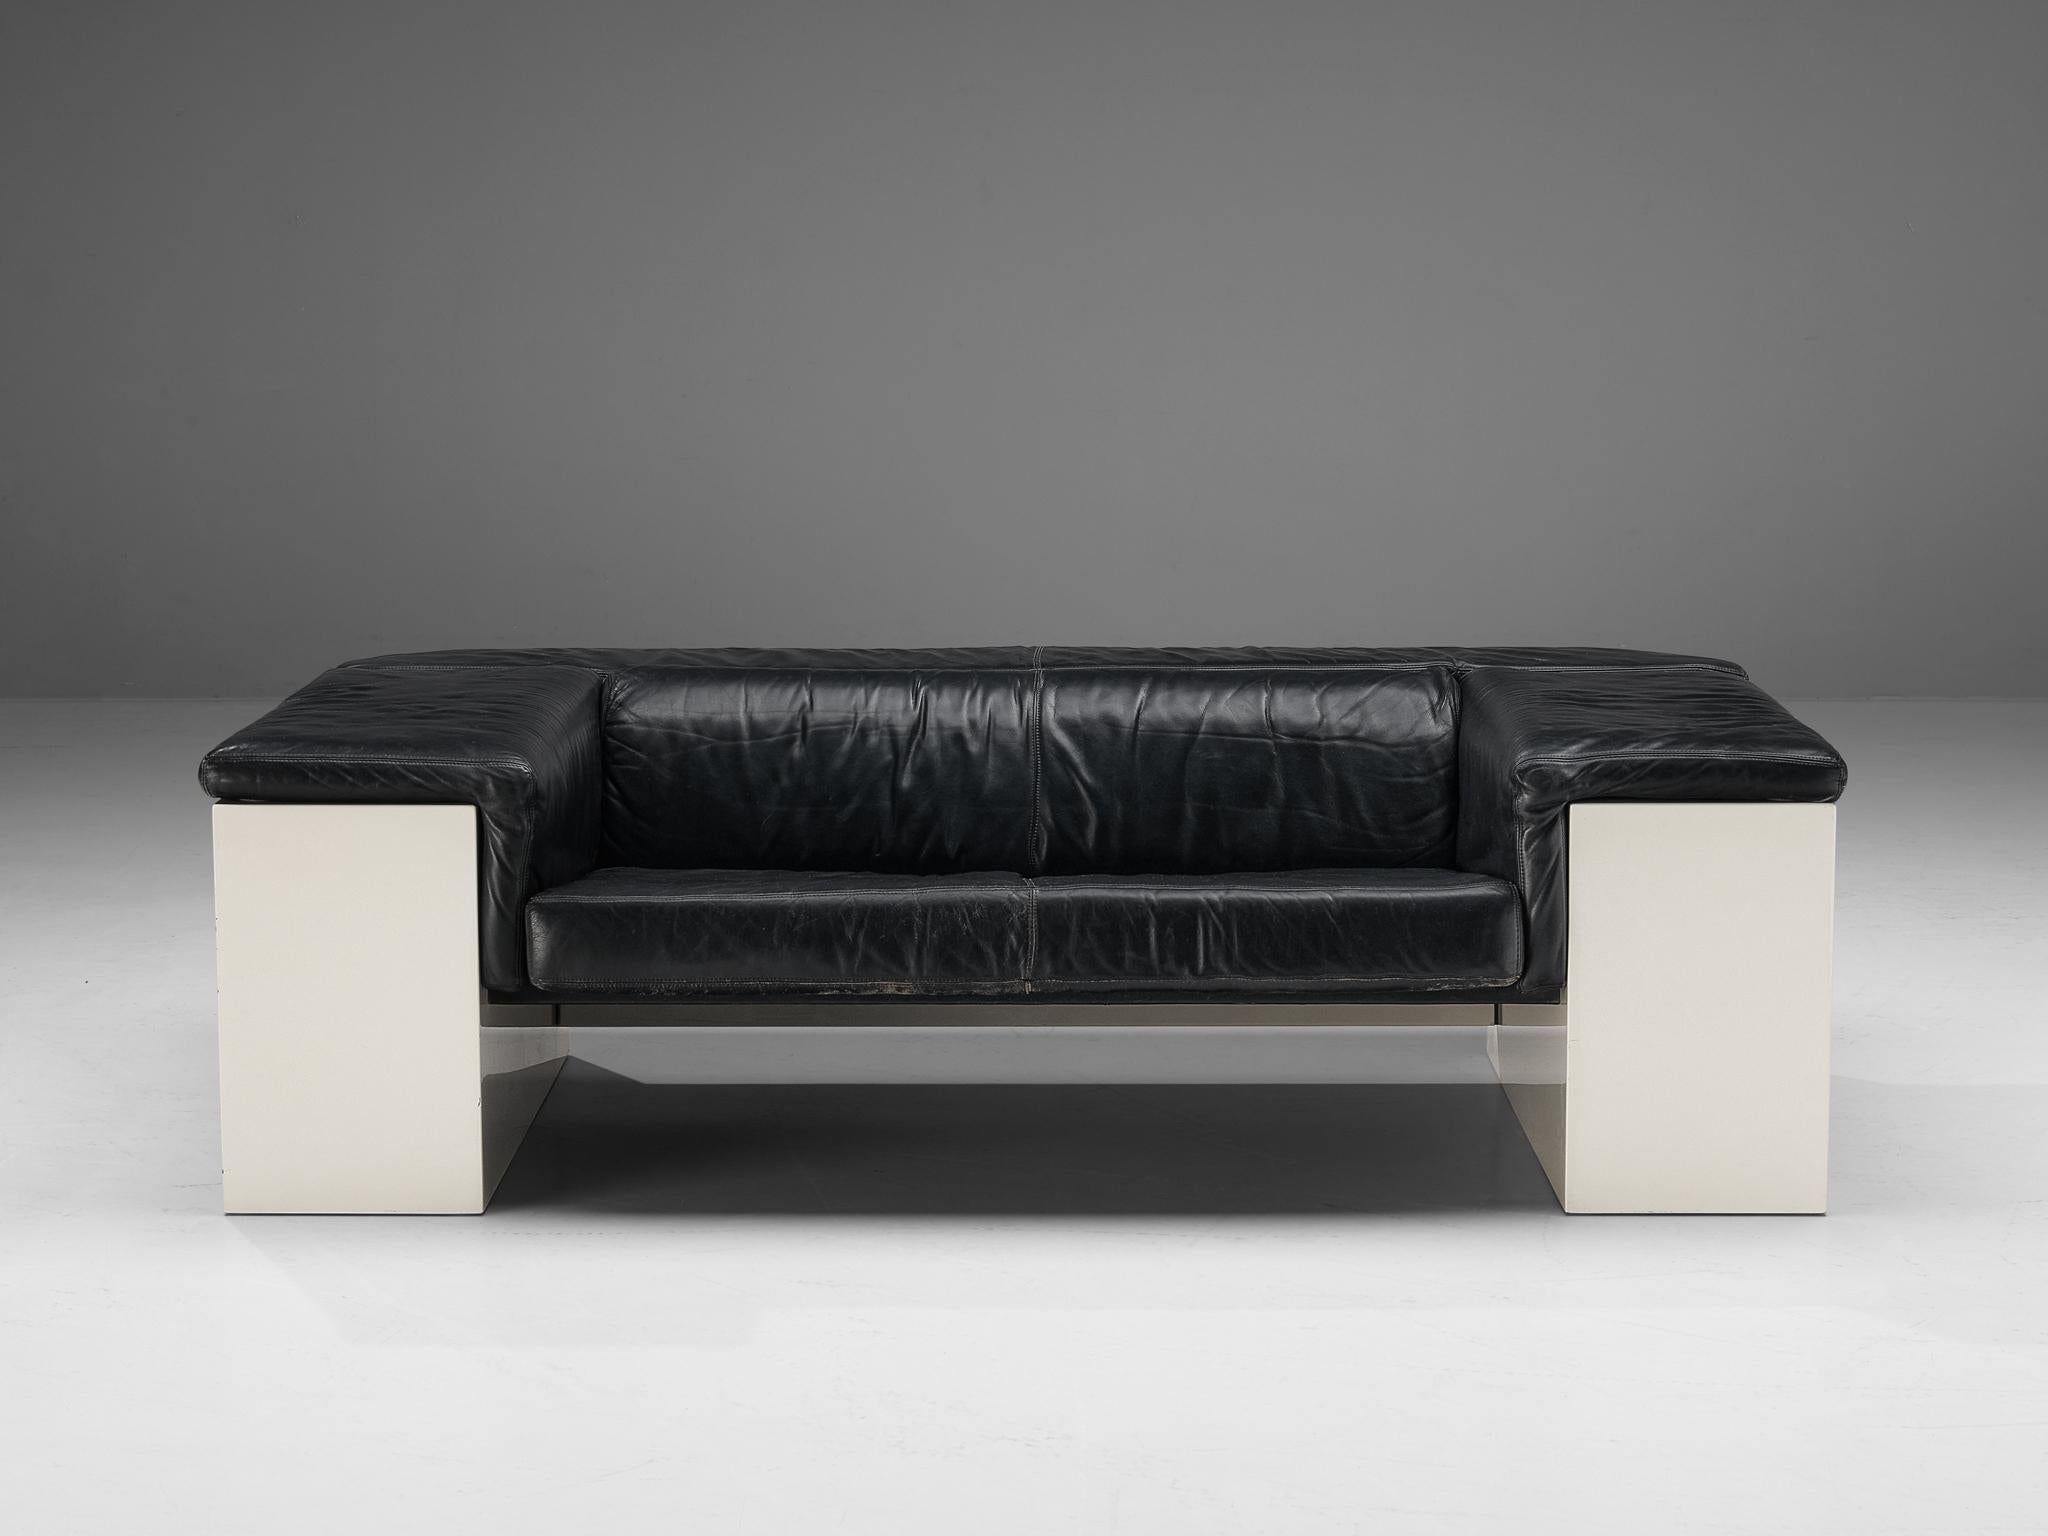 Cini Boeri for Knoll, sofa, model 'Brigadiere', leather, lacquered wood, Italy, 1976. 

Architectural sofa model 'Brigadiere' designed by Italian designer Cini Boeri for Knoll. This postmodern sofa is executed in refined black leather cushions